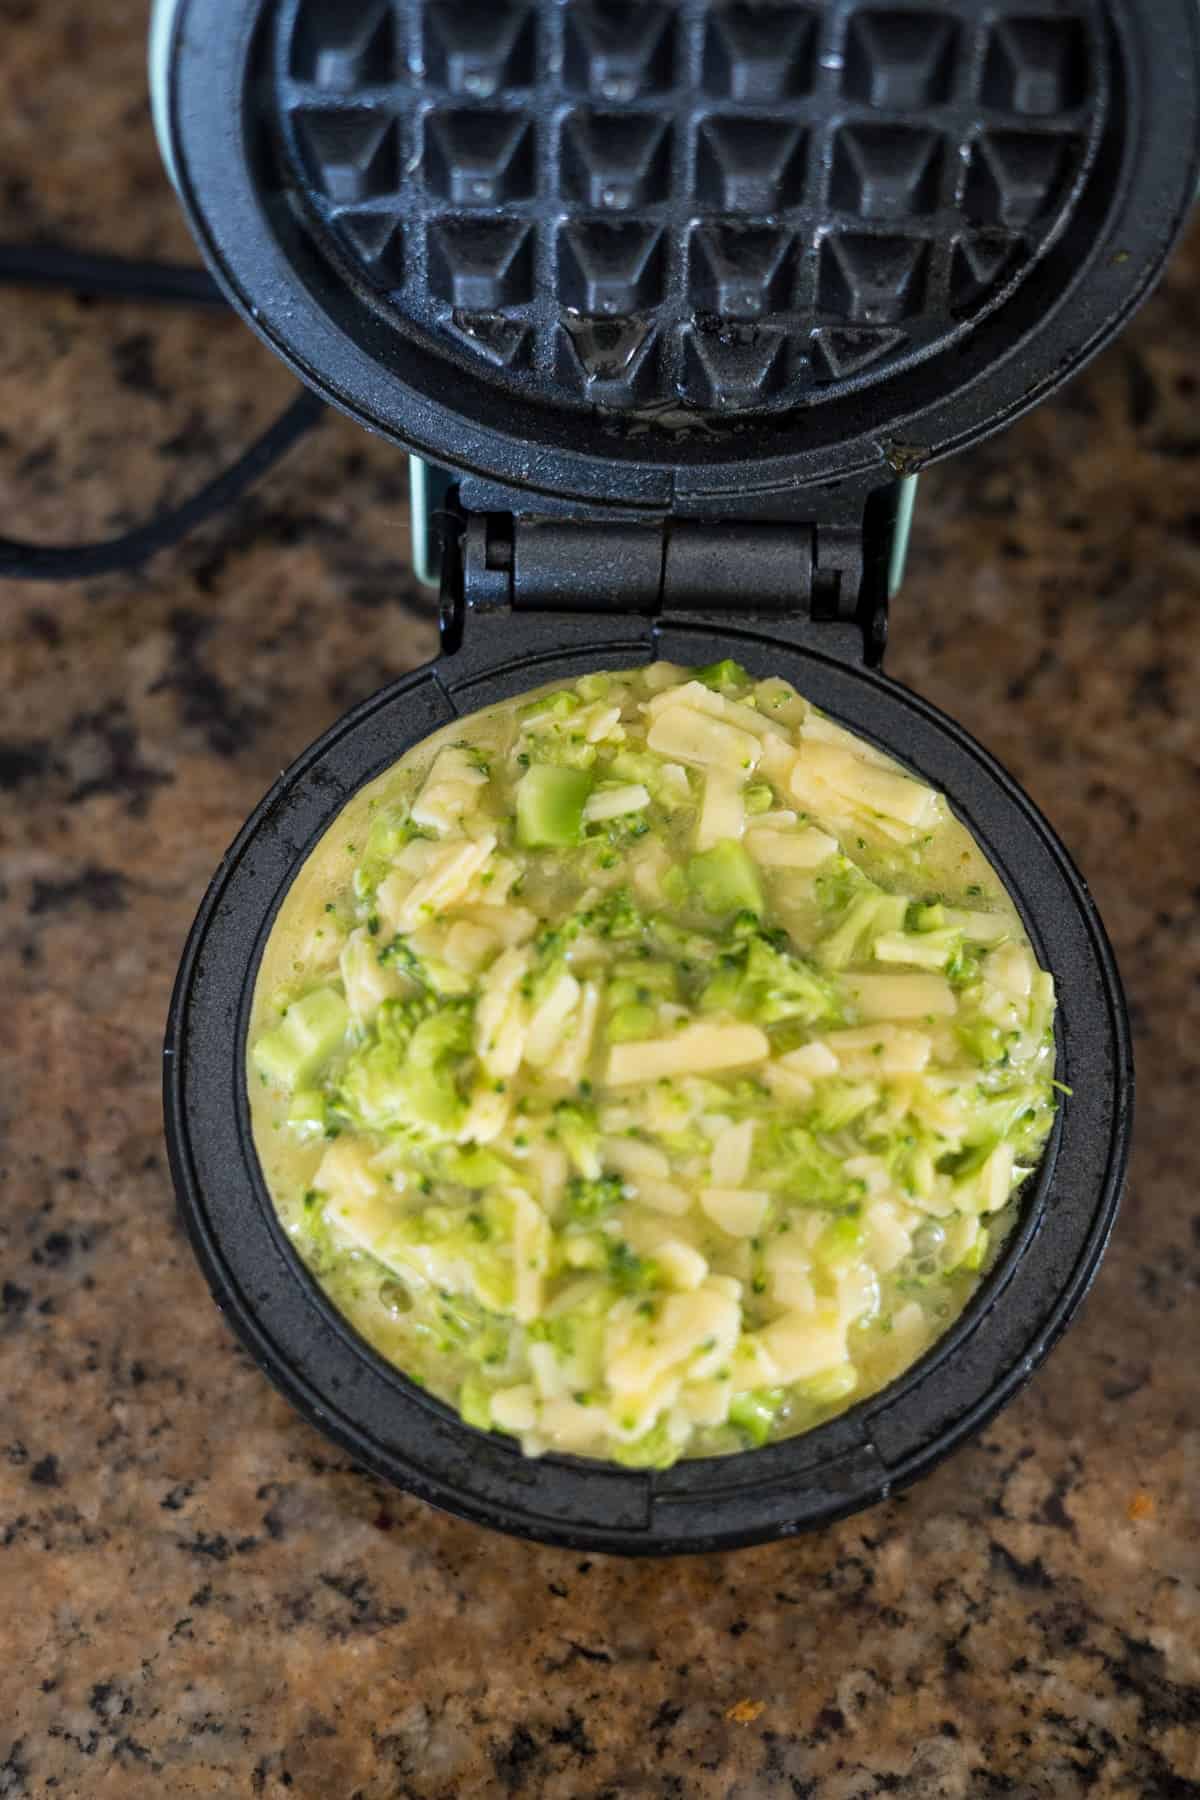 Vegetable batter with broccoli and cheddar poured into a waffle iron, ready to cook.